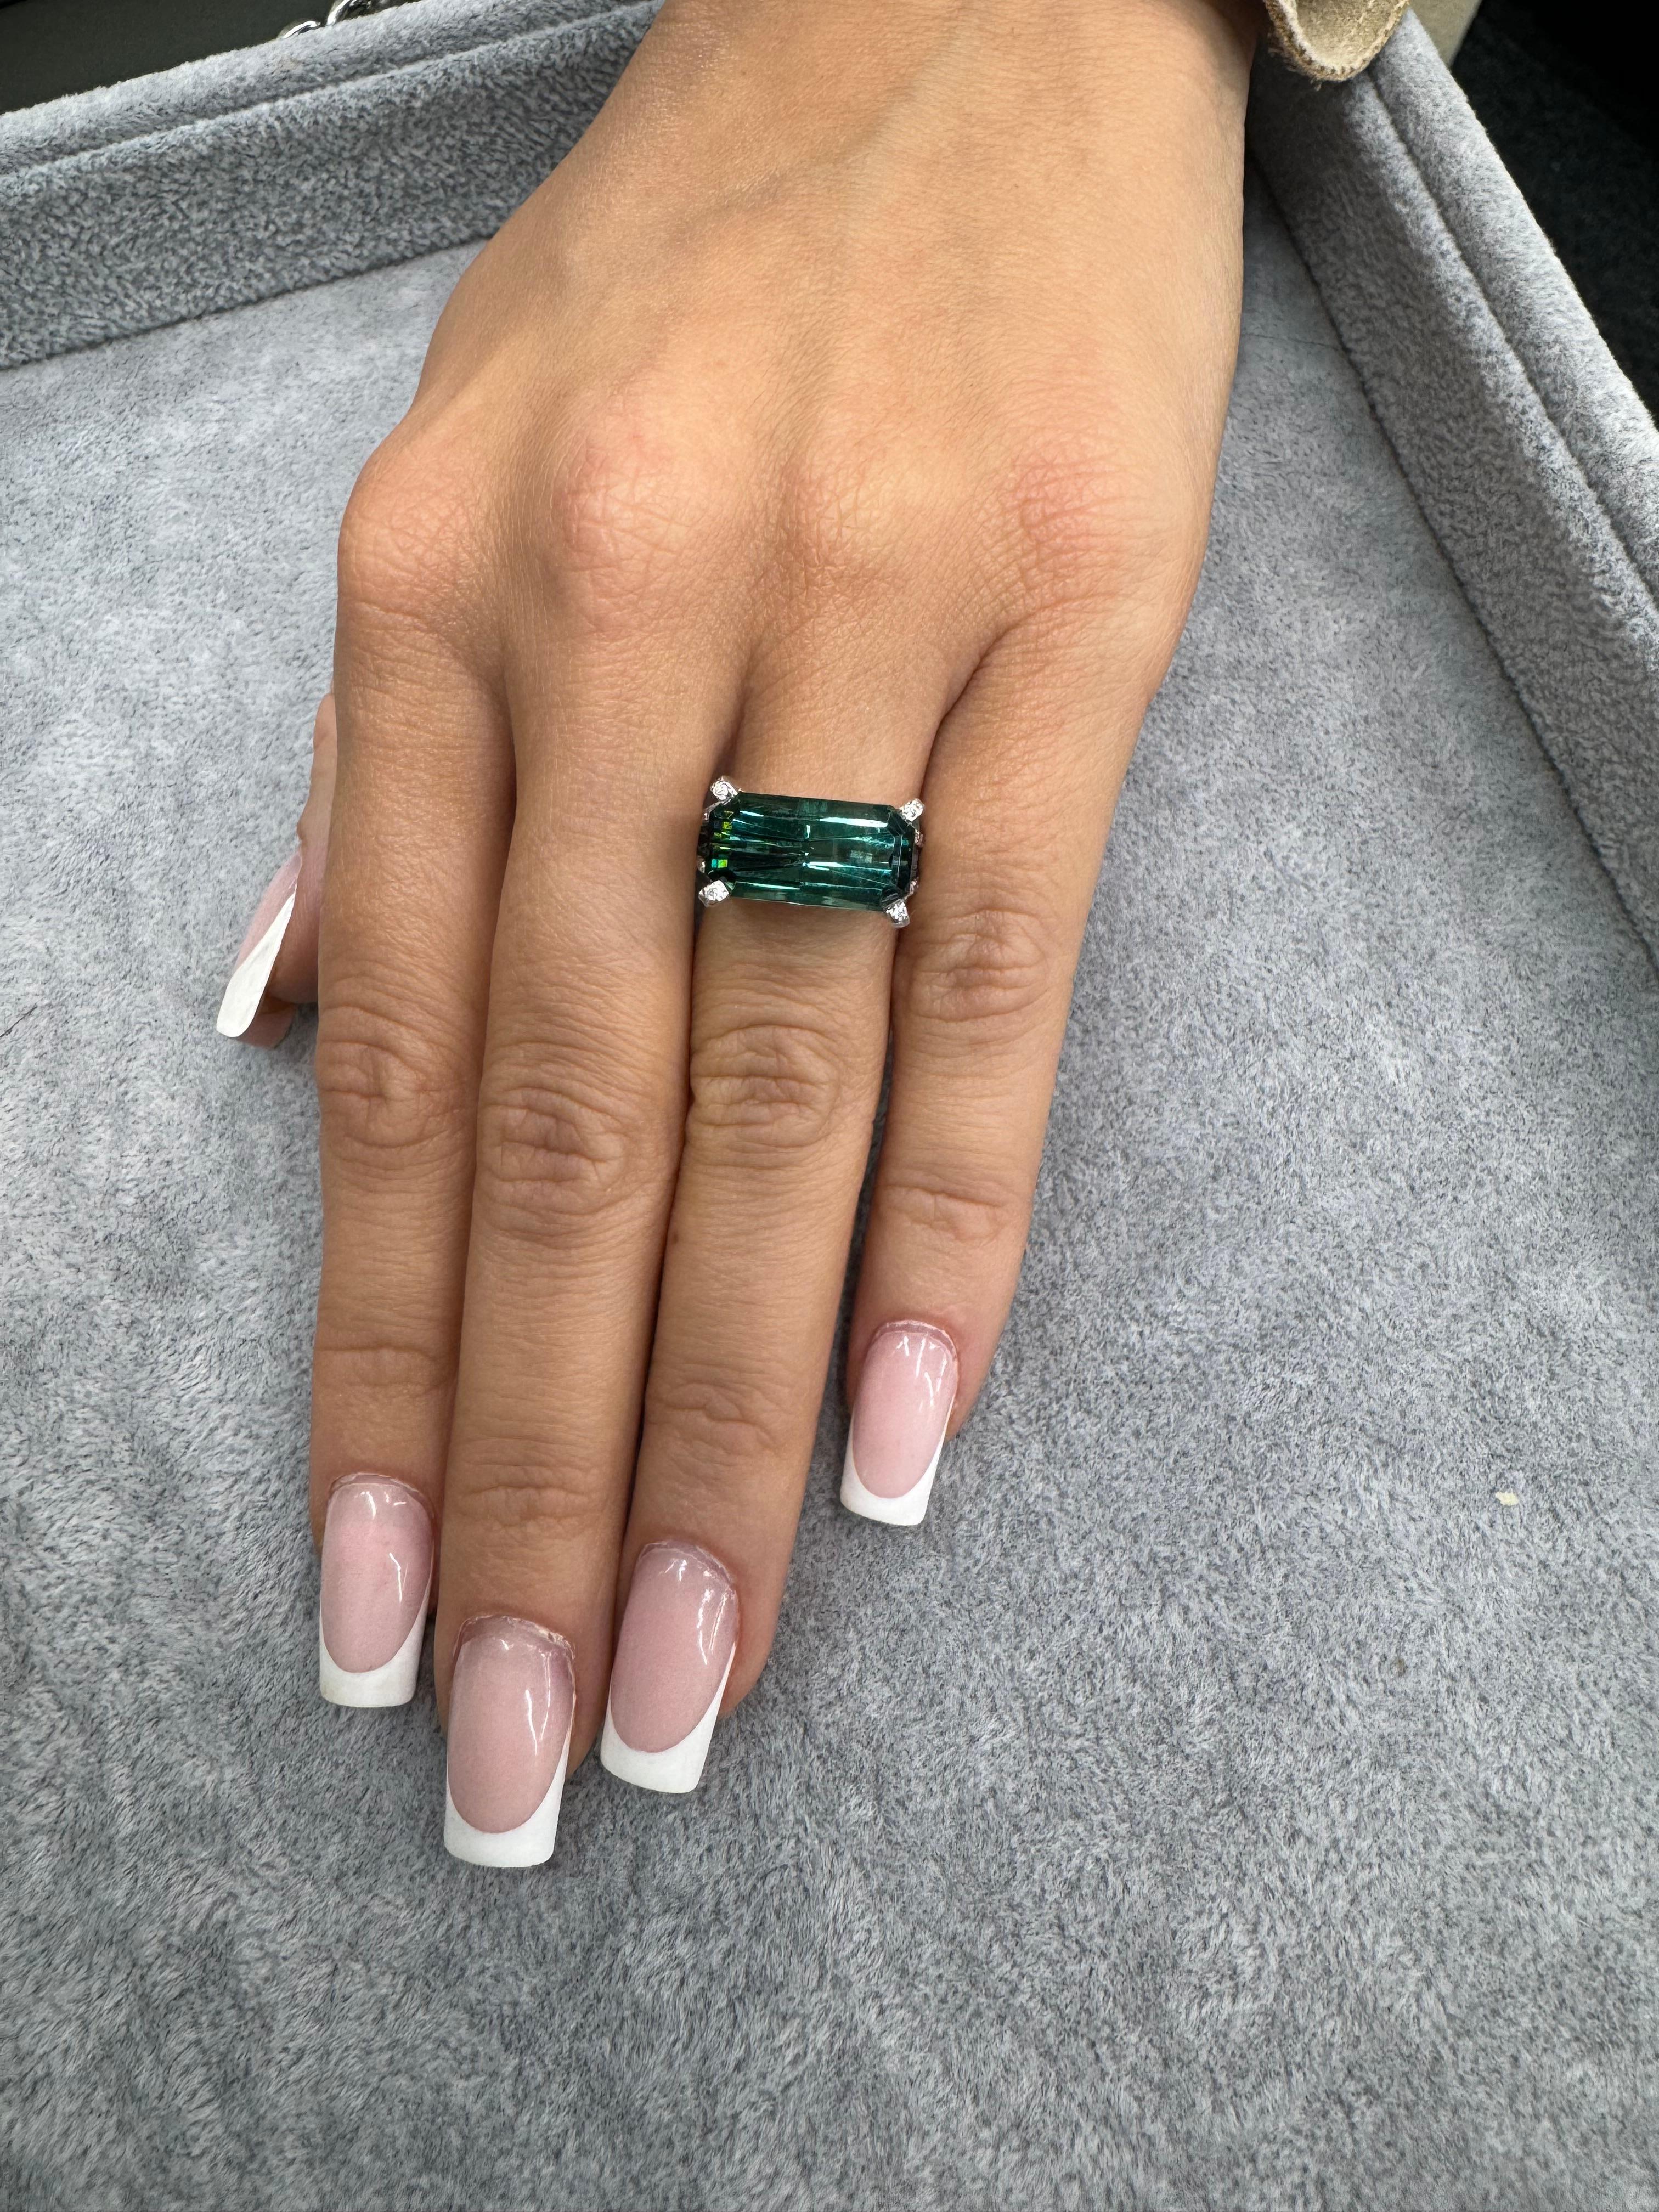 Emerald cut Indicolite Tourmaline weighing 6.11 carats with a diamond split shank mounting weighing 0.80 carats, in 18 karat white gold. 

Indicolite Tourmaline
14.8 mm x 7.7 mm
